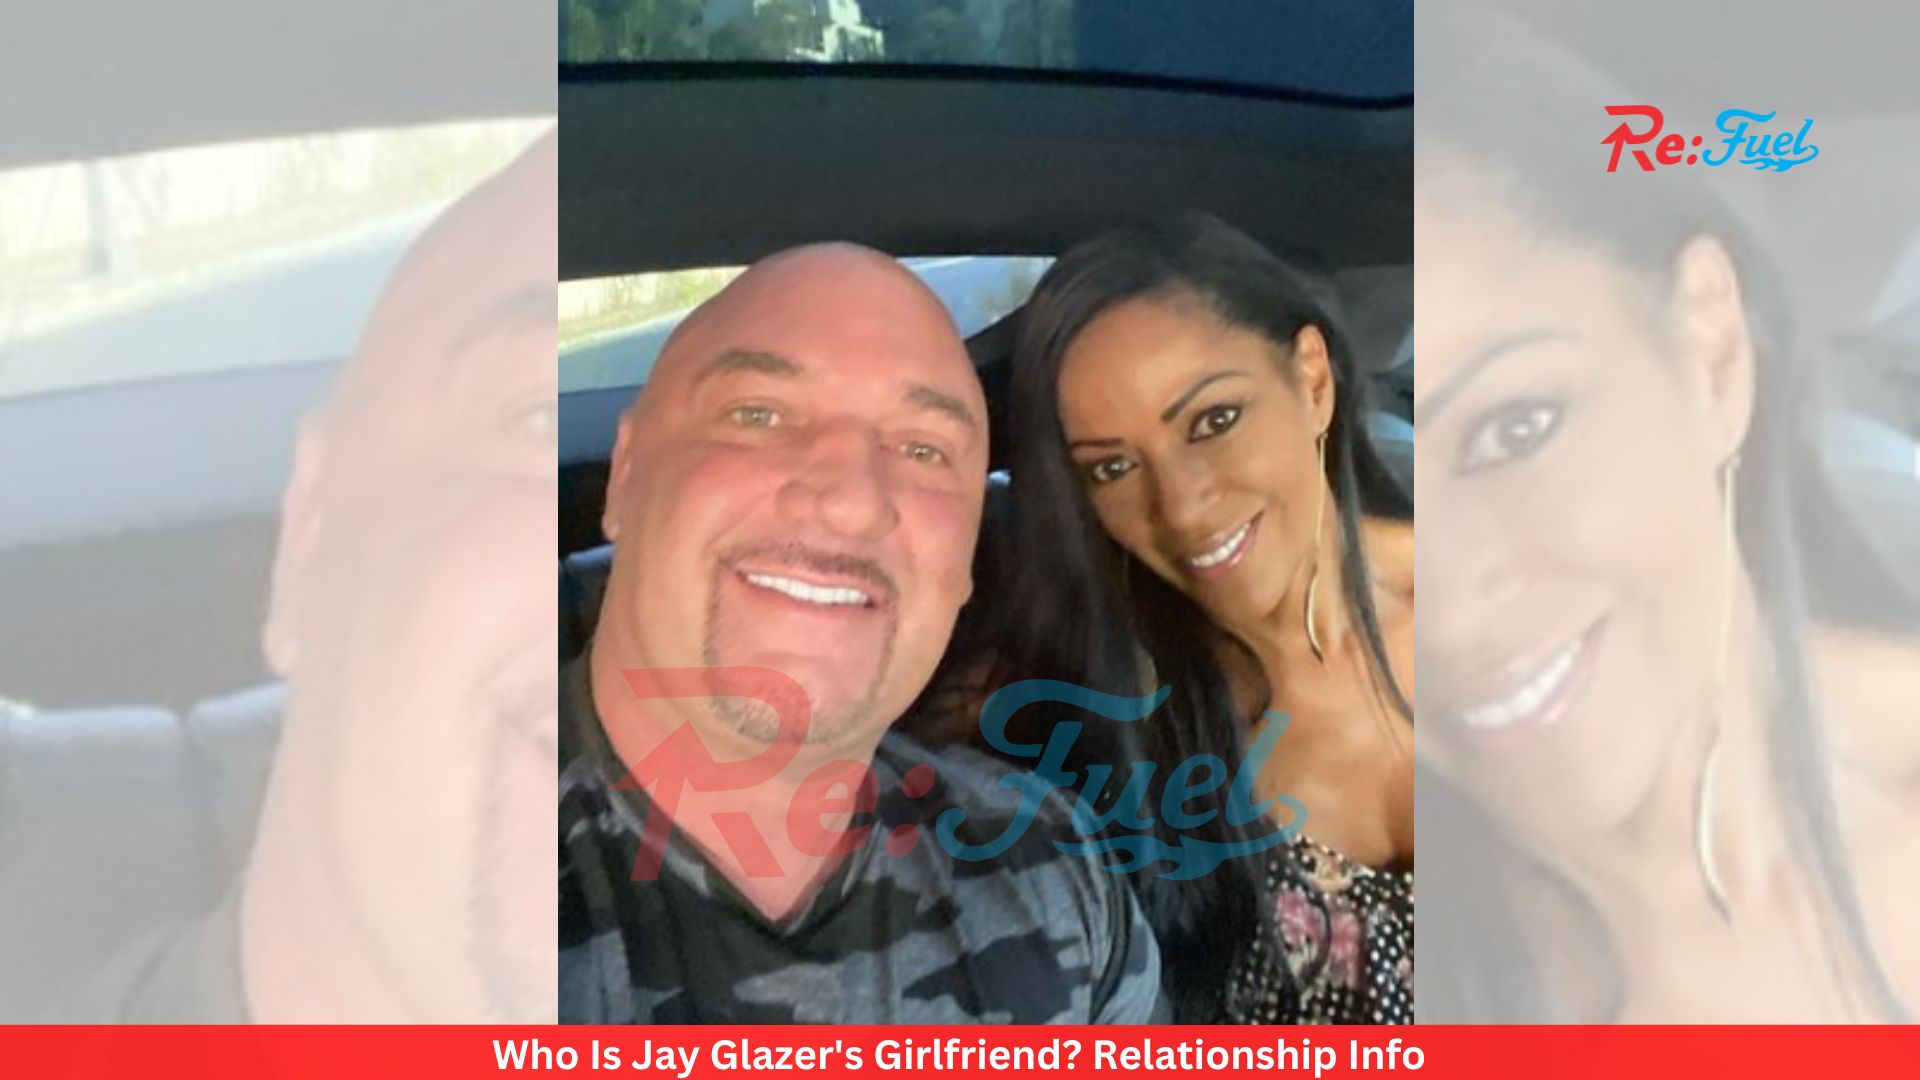 Who Is Jay Glazer’s Girlfriend? Relationship Info Babita Dhoundiyal 02/28/2023 zero comment Jason Charles “Jay” Glazer is a sportscaster and TV personality. Since 2004, he has worked as an NFL insider for Fox Sports’ NFL pregame studio show, FOX NFL Sunday. On the show, he gives exclusives, late-breaking news, injury reports, and other reports. In 2019, both the cast and the show were added to the TV Hall of Fame. Jay Glazer, a FOX Sports NFL Insider Reporter, has suffered from depression and anxiety for most of his life. He has tried to help himself in private as best he could in many different ways. Glazer wrote about his struggles with mental health for the first time in his memoir and self-help book Unbreakable, which will come out in paperback on April 4. Glazer told his best friend the truth, and Strahan was right there to help. He’s currently treating his depression with therapies after his friend recommended them. His last Instagram post is on his time in Thailand “As of my last day in Thailand, I am in excellent mental health. When the sky is blue!” One individual was there for him through his ups and downs as he battled his depression. The lovely Rosie Tenison, his girlfriend. In this article, we’ll discuss about their romance in further depth. Inside Jay Glazer And His Girlfriend Rosie Tension’s Relationship Rosie Tenison, who is in a relationship with Jay Glazer, is an American actress from Caldwell, Idaho. Rosie has a twin sister named Renee Tenison who looks just like her. On Rosie’s birthday, December 3, 2022, Glazer went on social media and posted a birthday message. Still, he did mention Rosie’s twin sister Renee, whose birthday is the same day as Rosie’s. With a picture of them in 2020, Jay Glazer and his new girlfriend Rosie made it official on social media that they are together. The two of them have been together for more than two years. He wrote “my beautiful girl” to Rosie in an Instagram post for her birthday in December 2020. Who Is Jay Glazer's Girlfriend? Relationship Info Also, Jay put a screenshot of Rosie wishing him a happy 53rd birthday in December 2022 on his Facebook page. He also let everyone know how much he appreciated their heartwarming messages. Recently, the two lovebirds were in Thailand’s natural surroundings. For his mental health check, they went to see him for two weeks. They went to a Muy Thai expert who taught them a special kind of Thai therapy that included mindfulness techniques meant to help with anxiety, depression, and overall mental health. Also Read: Who Is Annika Sorenstam’s Husband? All You Need To Know! Who Is Jay Glazer’s Girlfriend, Rosie Tenison? Rosie Tenison, who made her debut on the world stage as a model and had a brief acting career after her birth on December 2, 1978, in Caldwell, Idaho, is a well-known figure today. In 1991, Rosie made her acting debut on an episode of the Fox sitcom “Married… with Children,” playing the character of Mopsy. She made her big screen debut opposite Chris Rock in the mockumentary comedy “CB4” (1993). Her final 20th-century screen appearance came in a 1999 episode of “The Steve Harvey Show,” a WB production. Who Is Jay Glazer's Girlfriend? Relationship Info Also Read: Know About Carson Wentz’s Wife As Commanders Released Him After One Season During the 1990s, Tenison also appeared in a few Playboy videos and TV specials. Later, he became an actor and appeared on shows like “The Fresh Prince of Bel-Air,” “Judging Amy,” and “Martin.” In the past few years, she has also been active in issues of racial justice and how people of color are shown in the media. Renee has also done volunteer work for charities and other good causes.